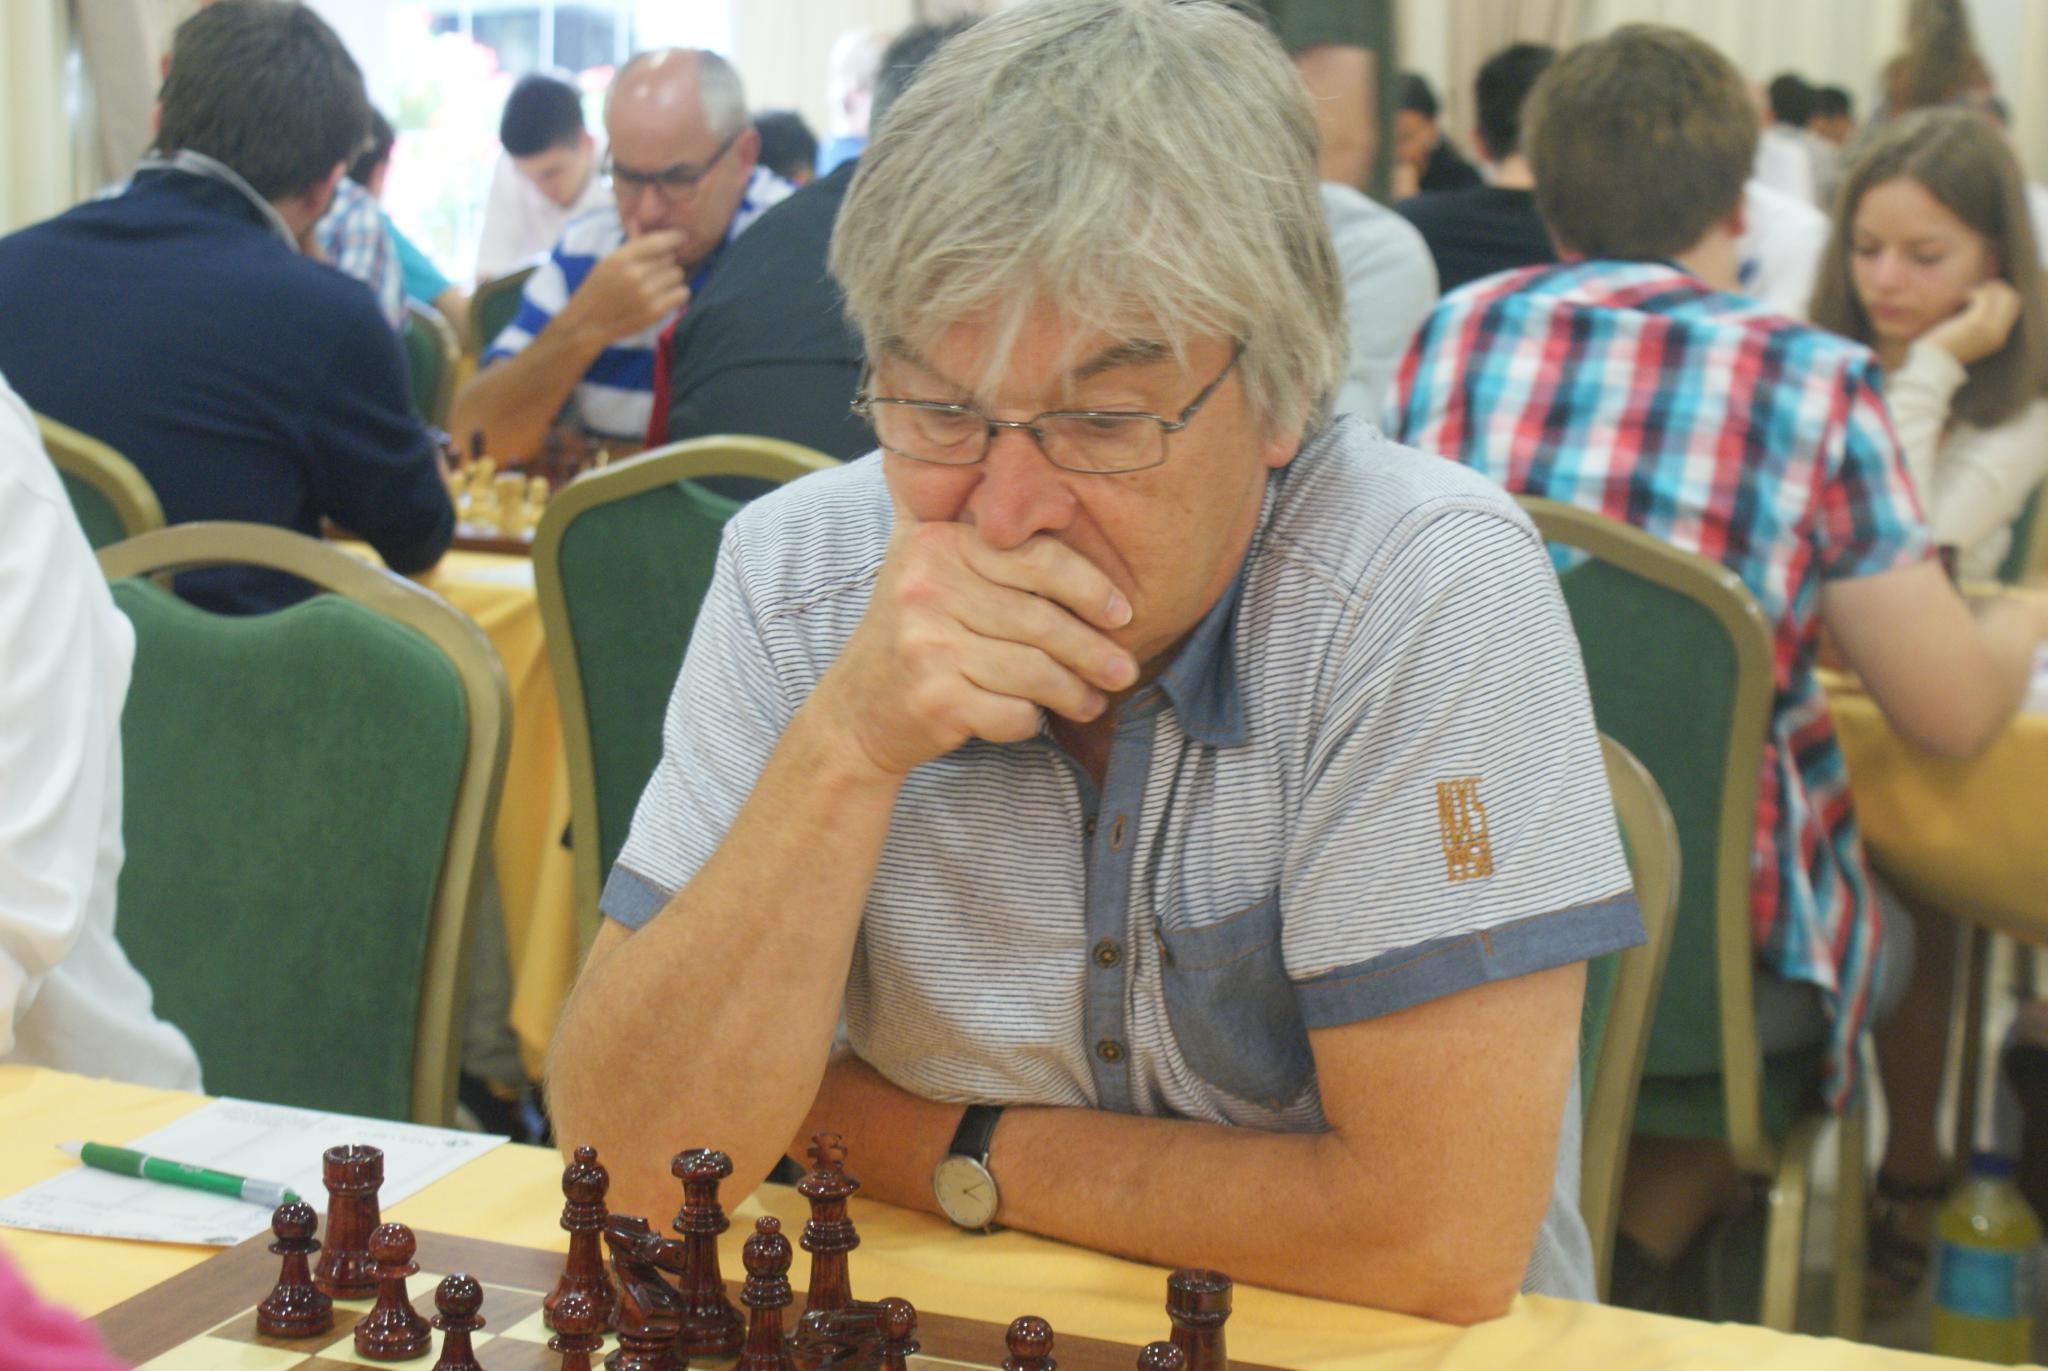 an elderly man looks intently at the chess game